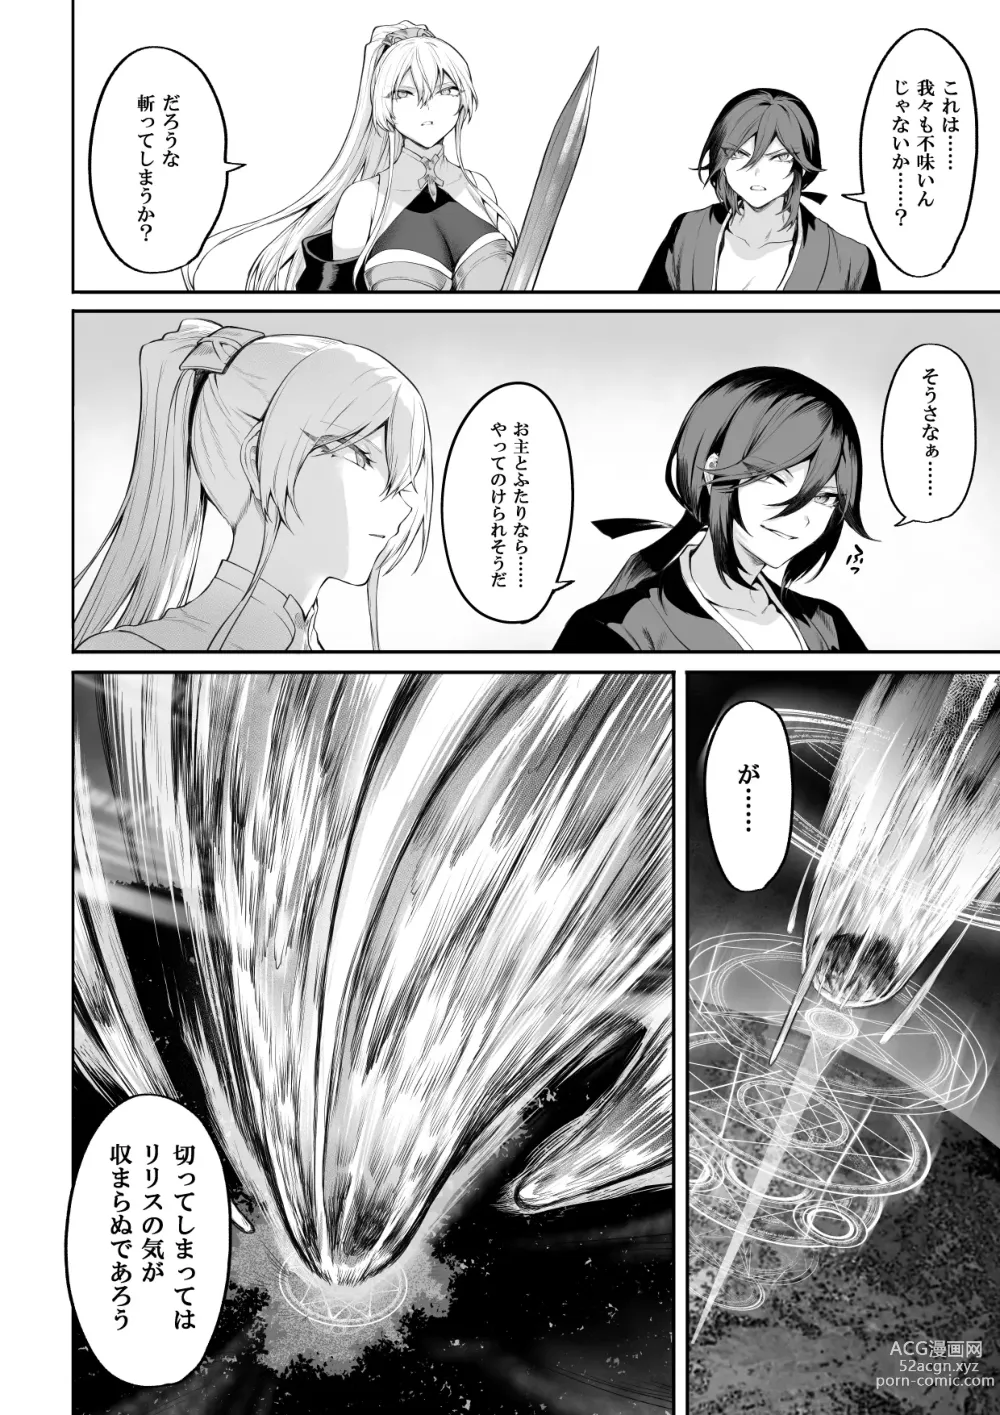 Page 137 of doujinshi 戦乙女といくさごと！〜女魔法使い編〜